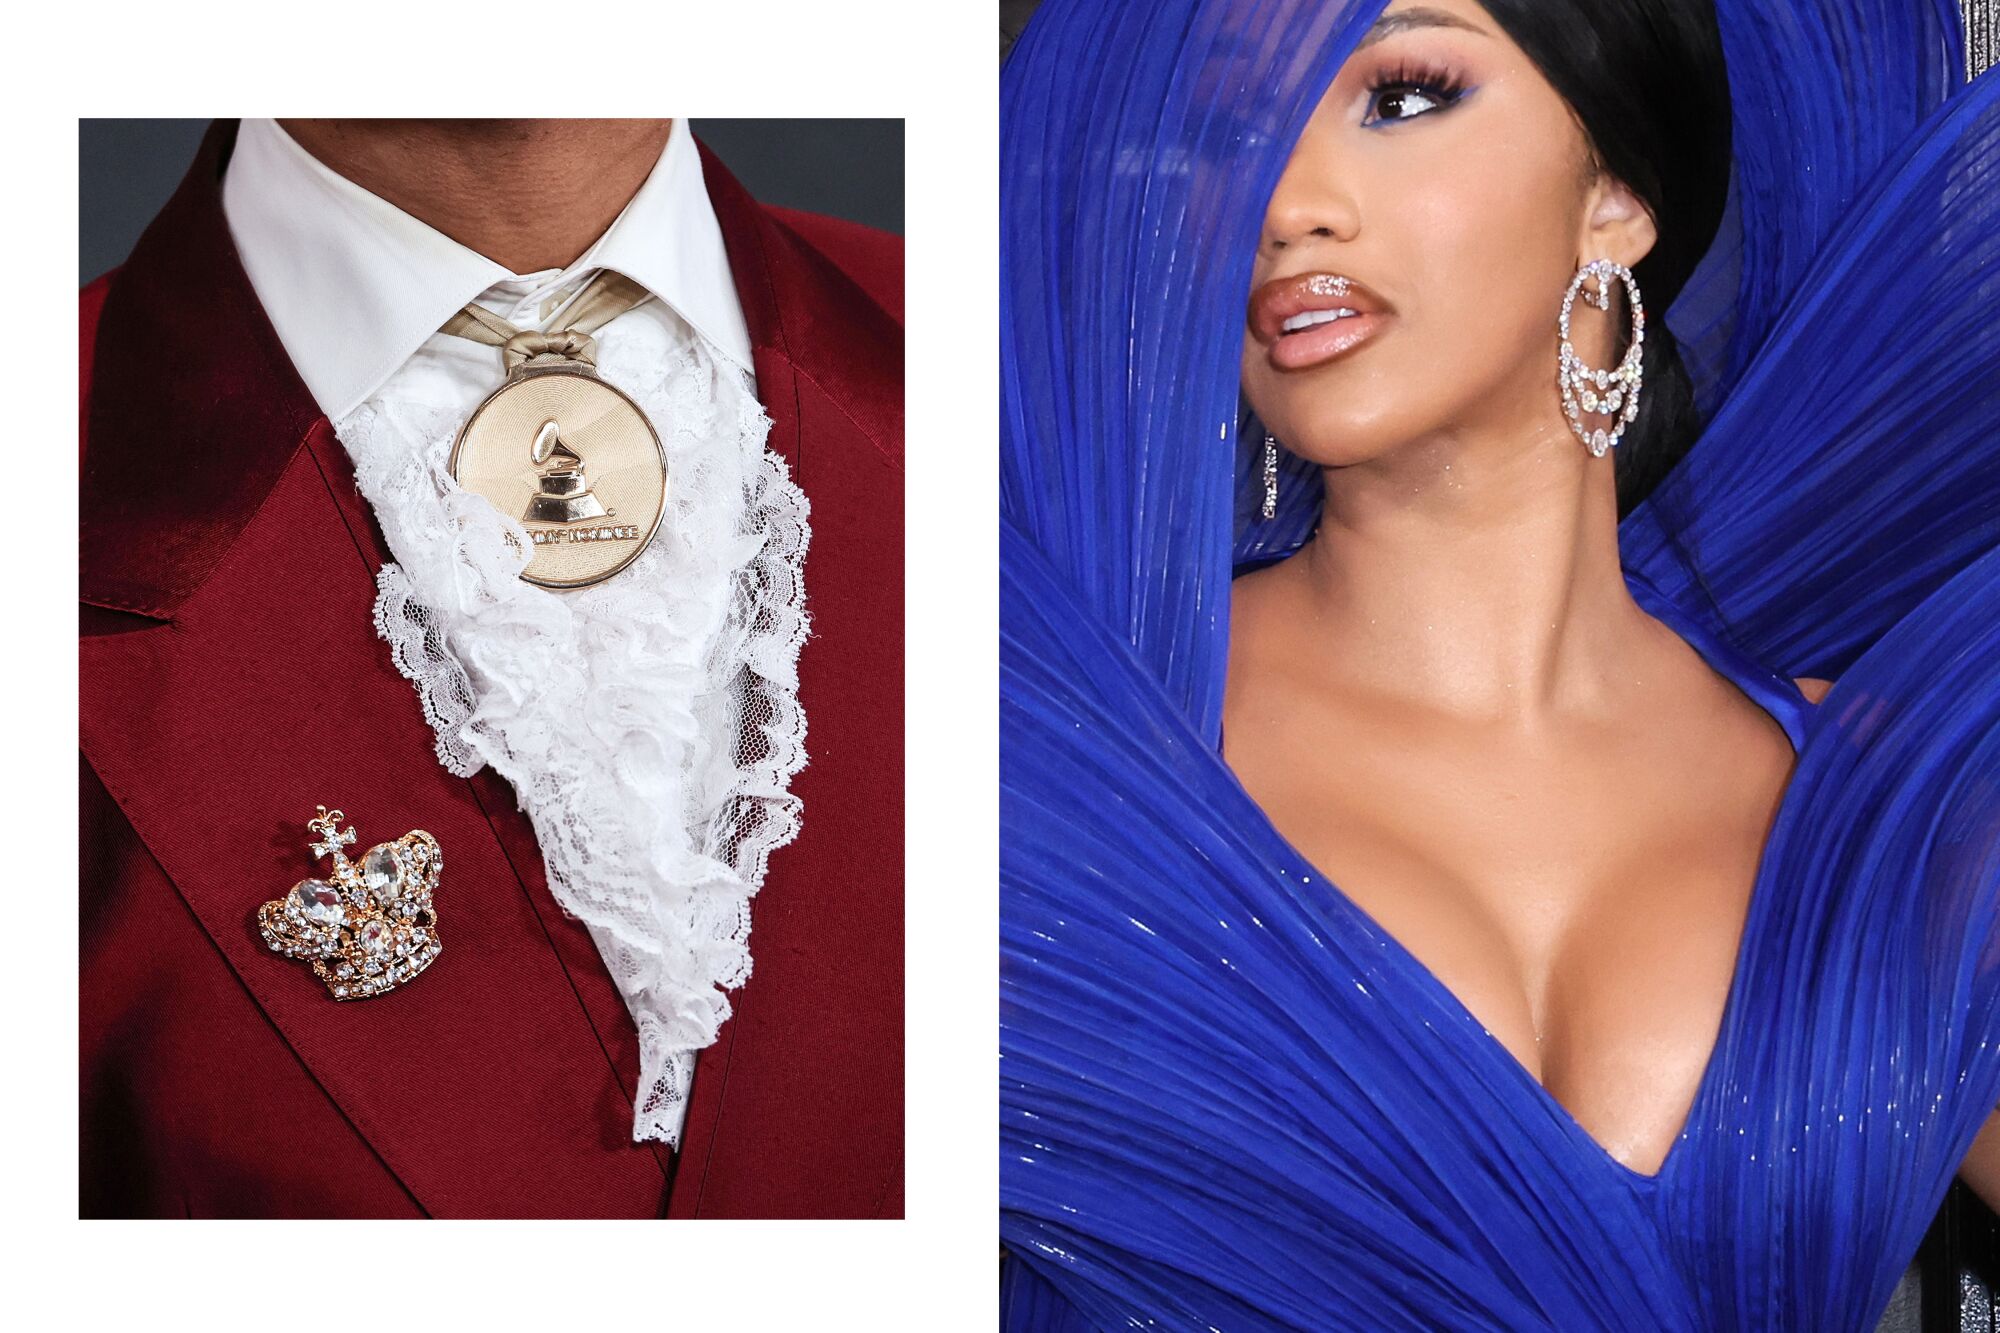 Sir The Baptist (L) and Cardi B attend the 65th Grammy Awards held at the Crytpo.com Arena